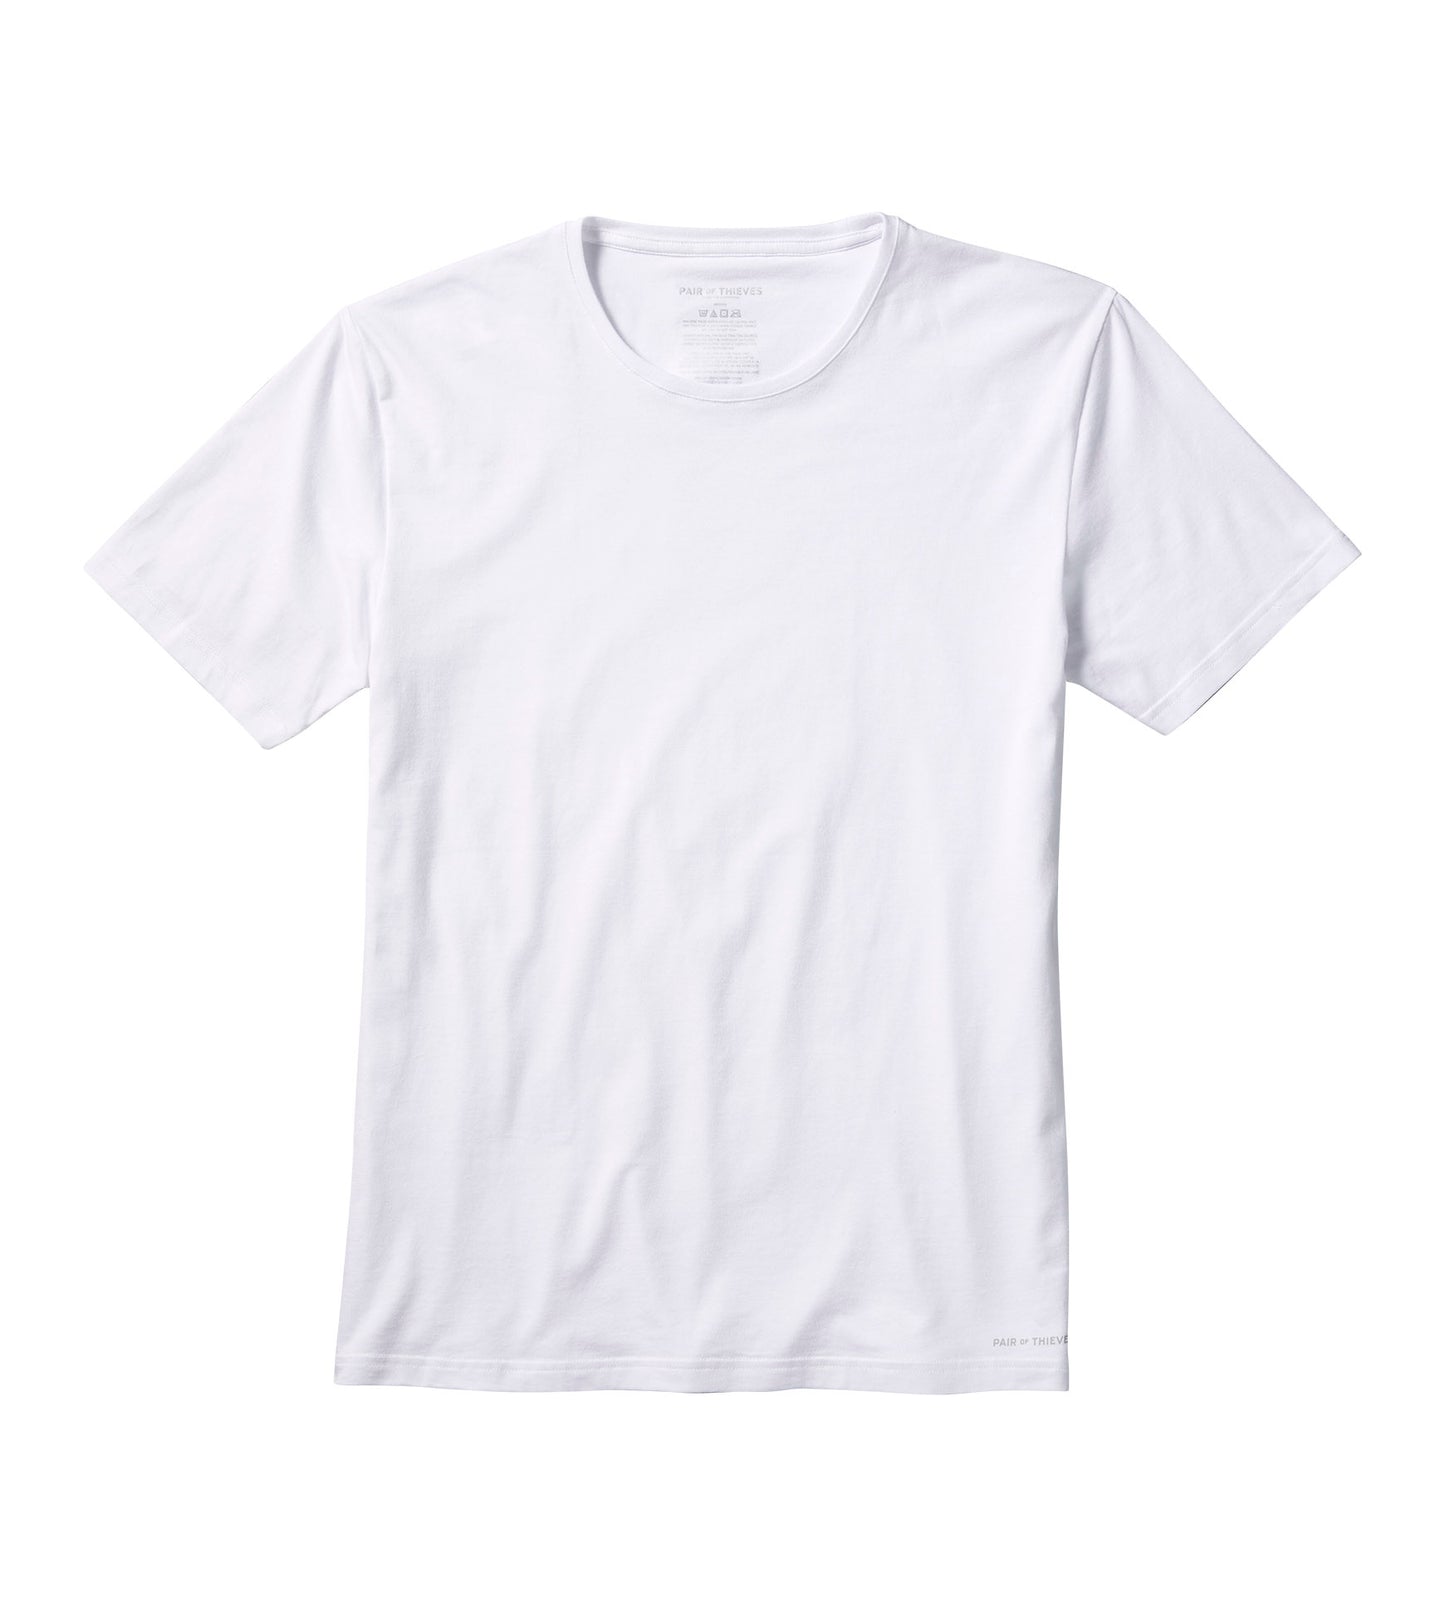 SuperSoft Crew Neck Tee - WHITE - Pair of Thieves